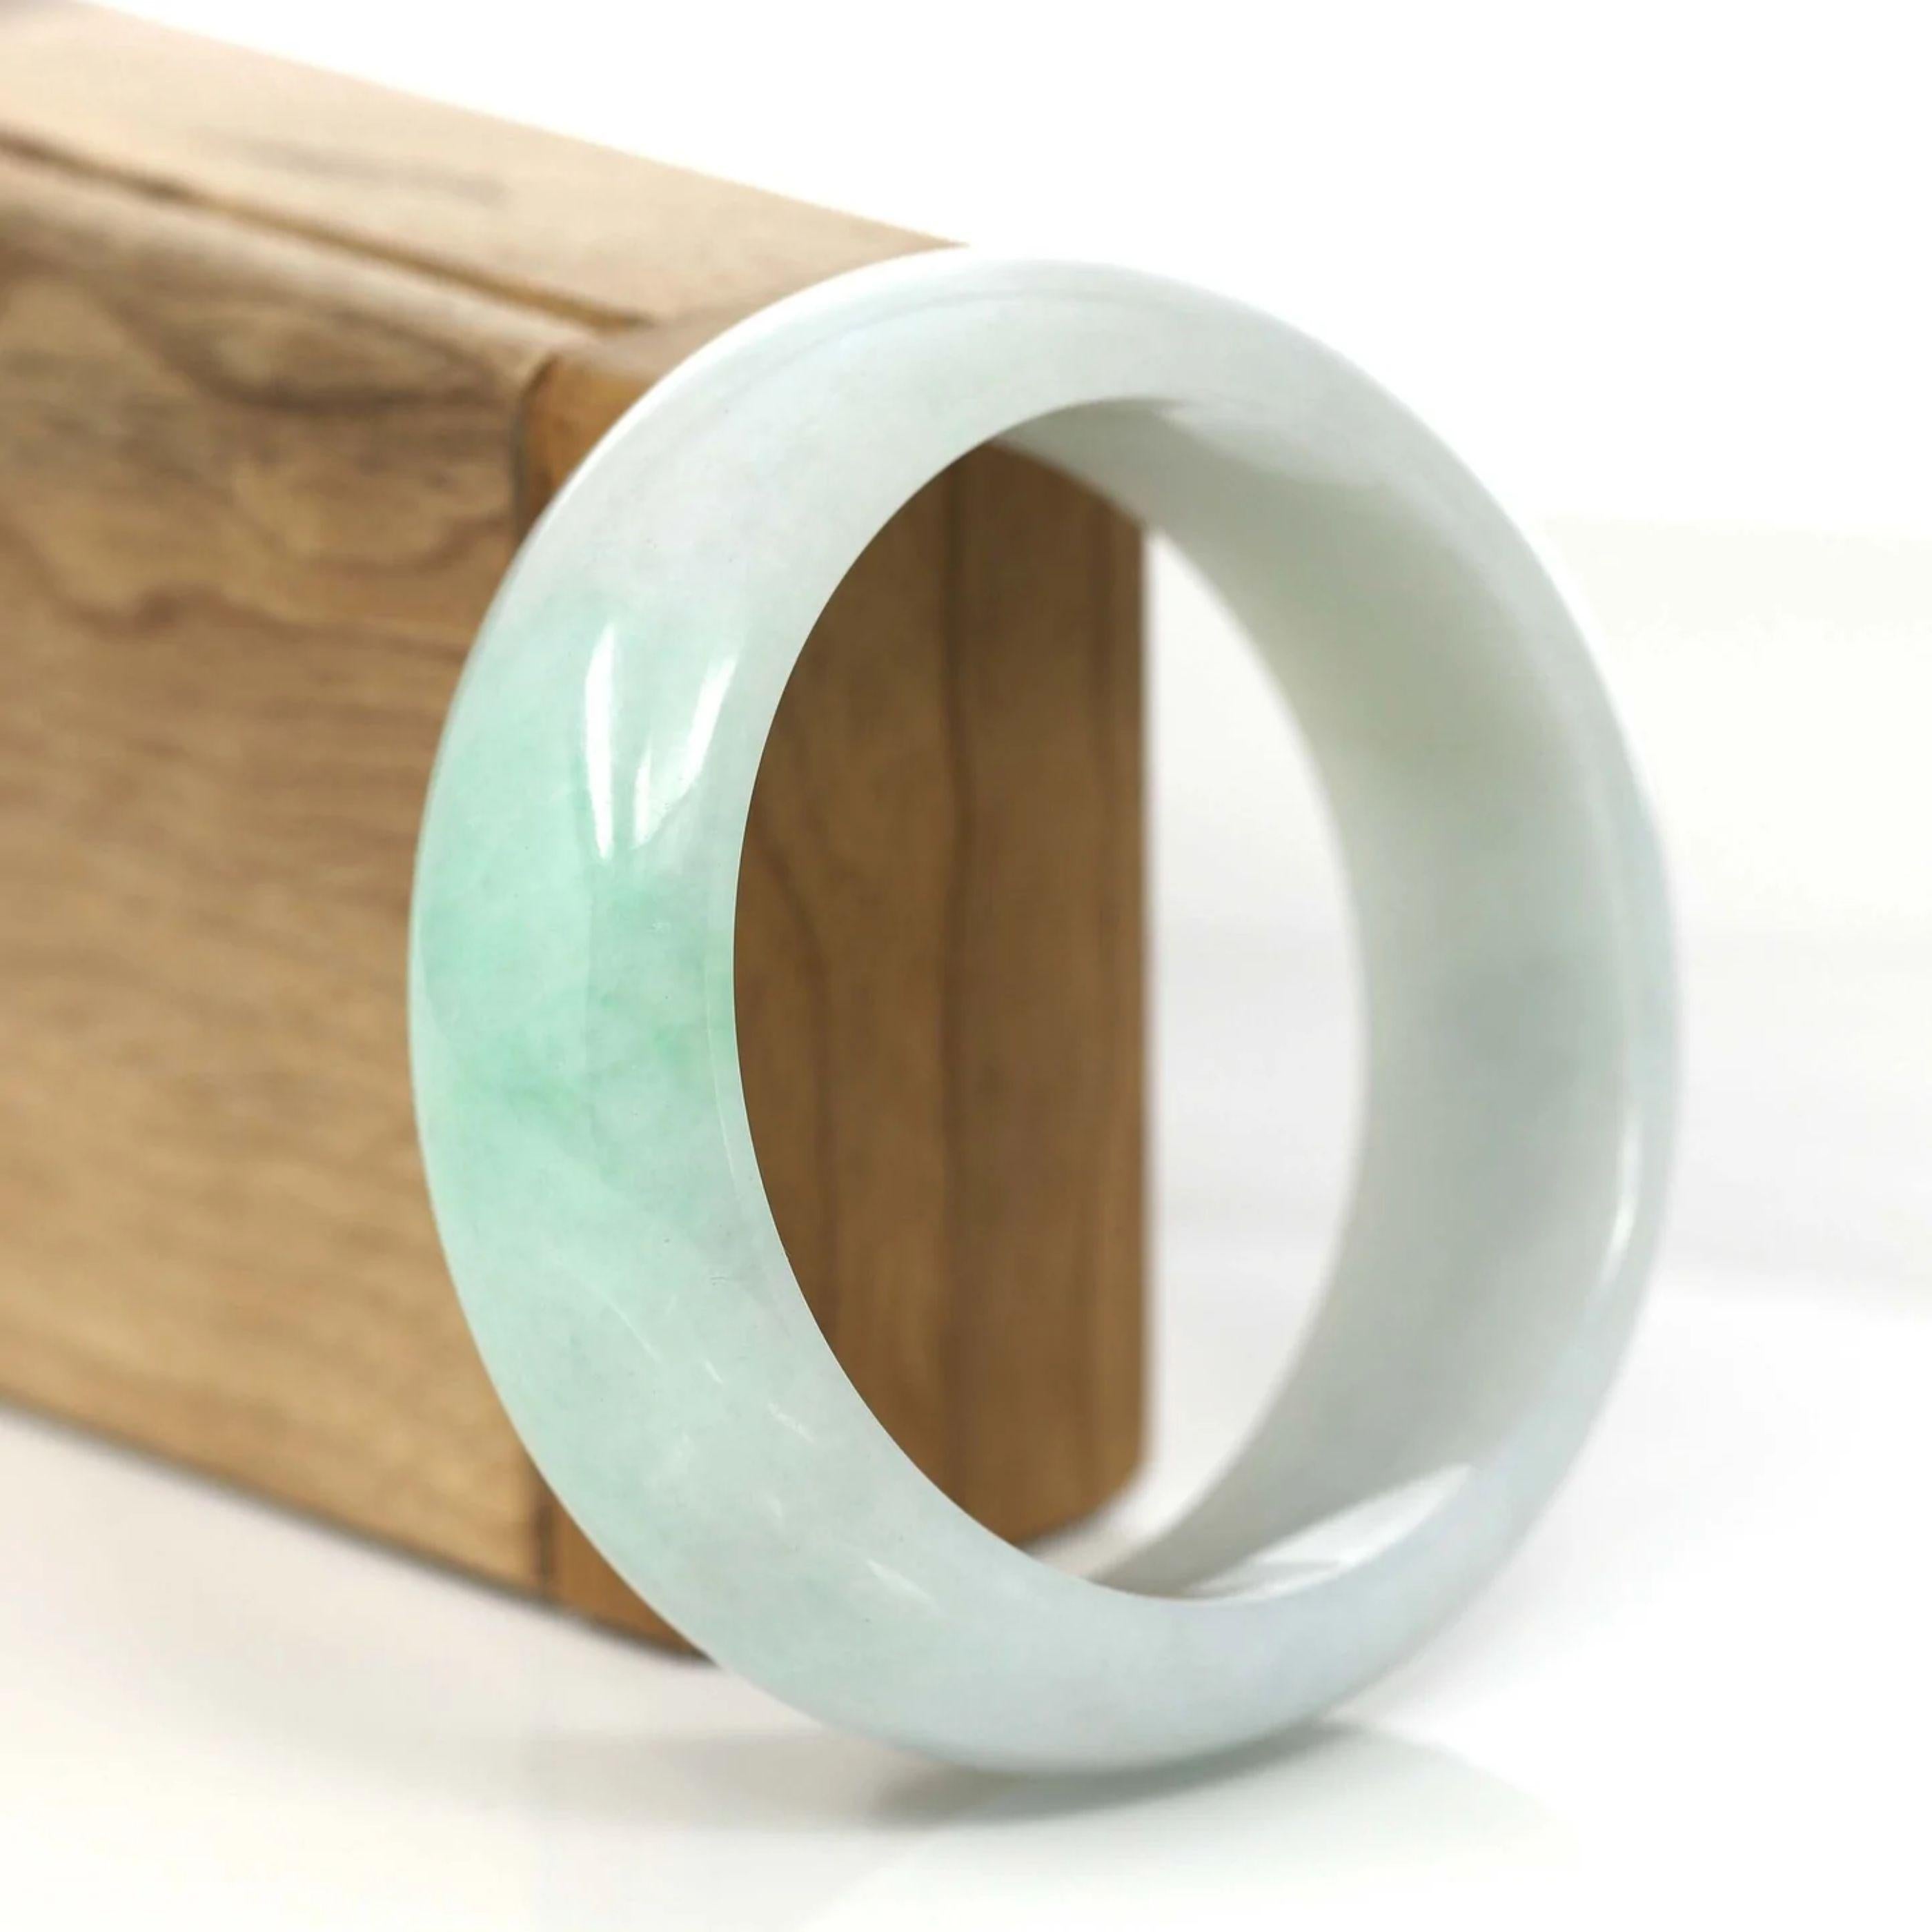 * DETAILS--- This bangle is made with very high-quality genuine Burmese Jadeite jade. The jade texture is fine and smooth with a part green color. It looks so beautiful and clean in a wider size. It's a luxury gift for you and your love. It's a